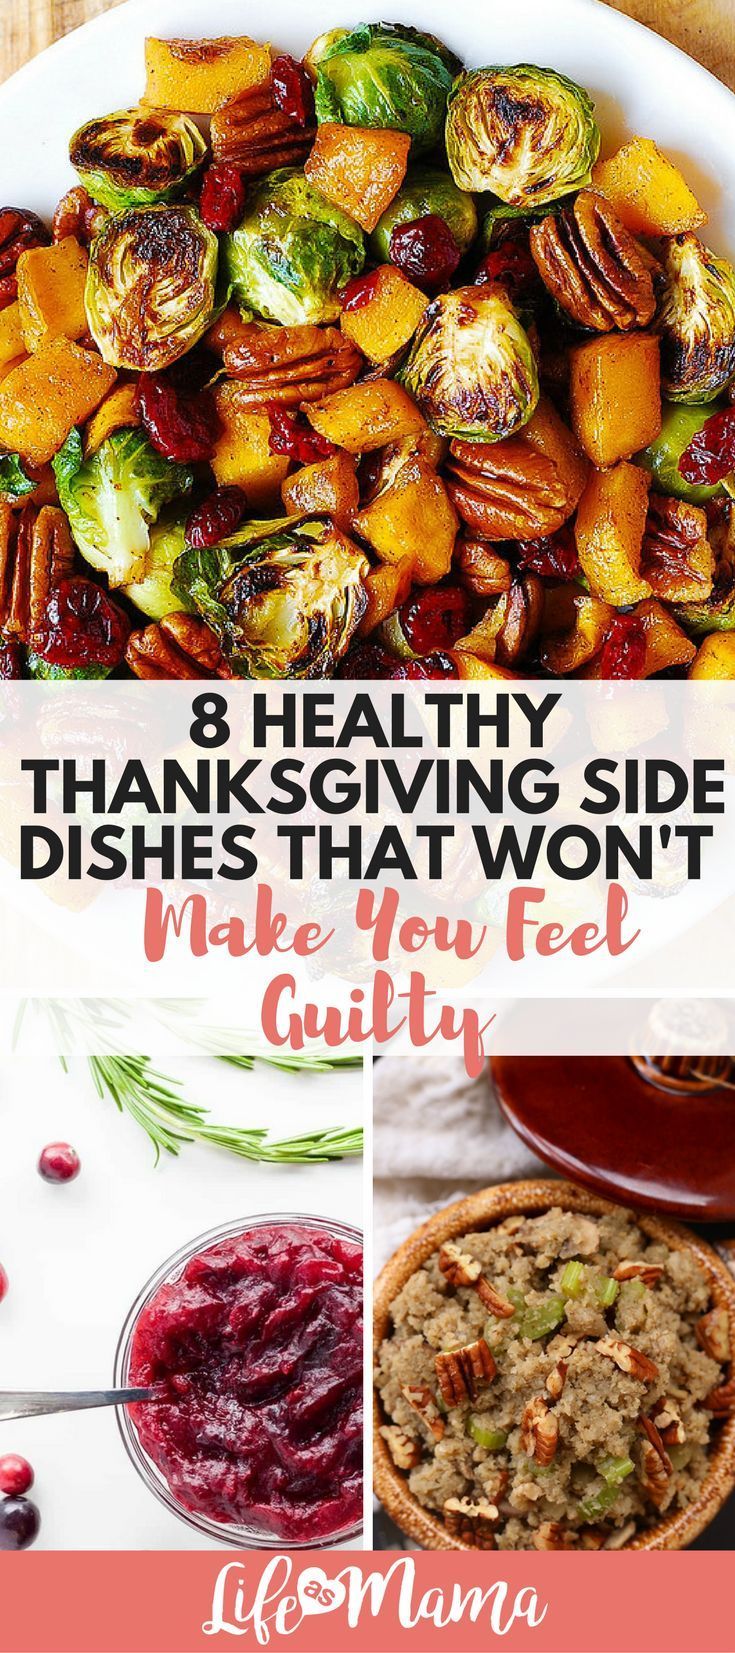 8 Healthy Thanksgiving Side Dishes That Won't Make You Feel Guilty - 8 Healthy Thanksgiving Side Dishes That Won't Make You Feel Guilty -   19 easy healthy thanksgiving sides ideas